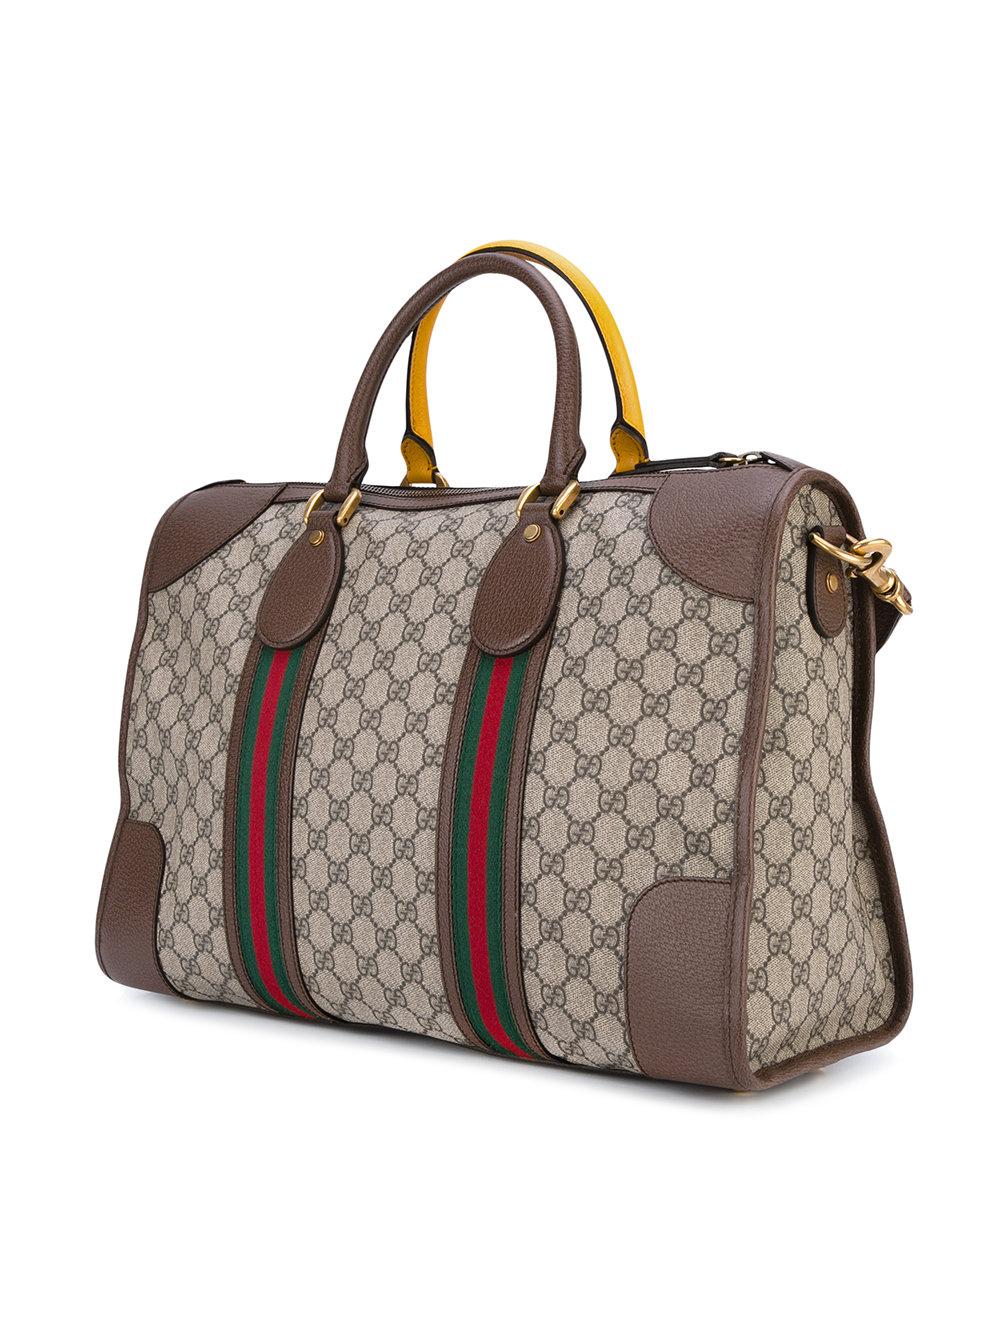 Gucci - Gg Supreme Duffle Bag - Men - Polyurethane/leather - One Size in Brown for Men - Lyst